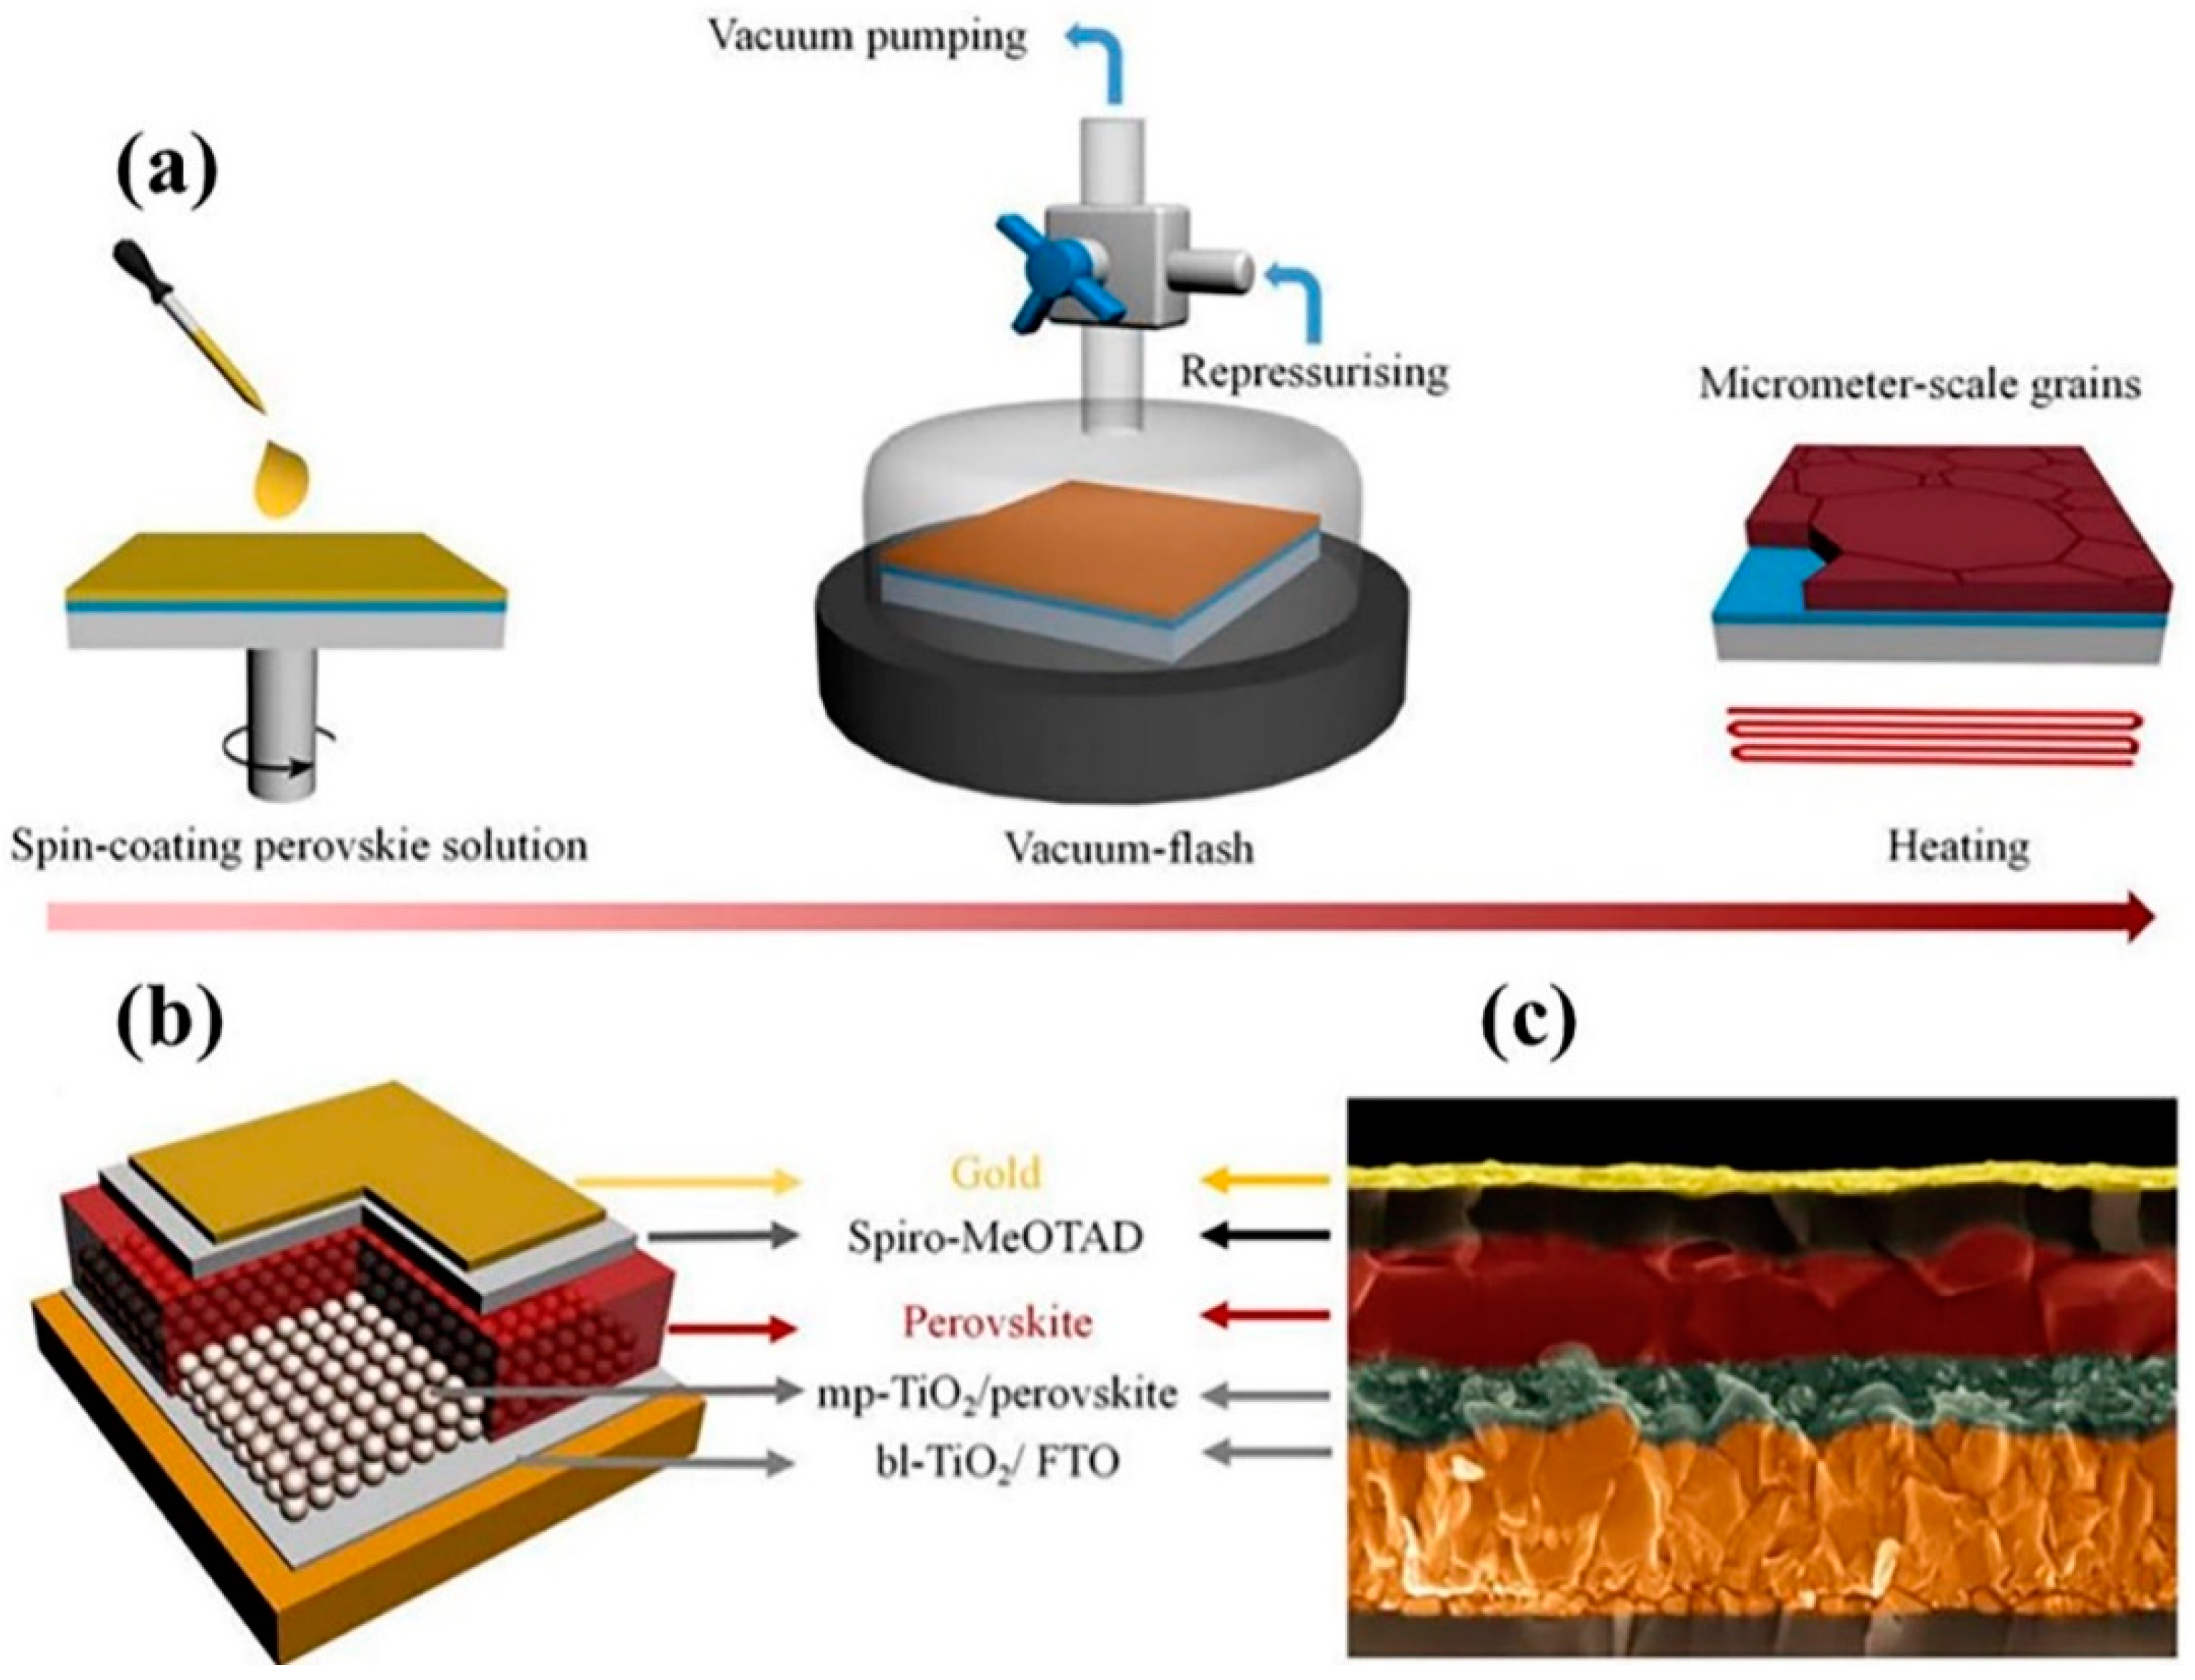 Slot-Die Coated Perovskite Films Using Mixed Lead Precursors for